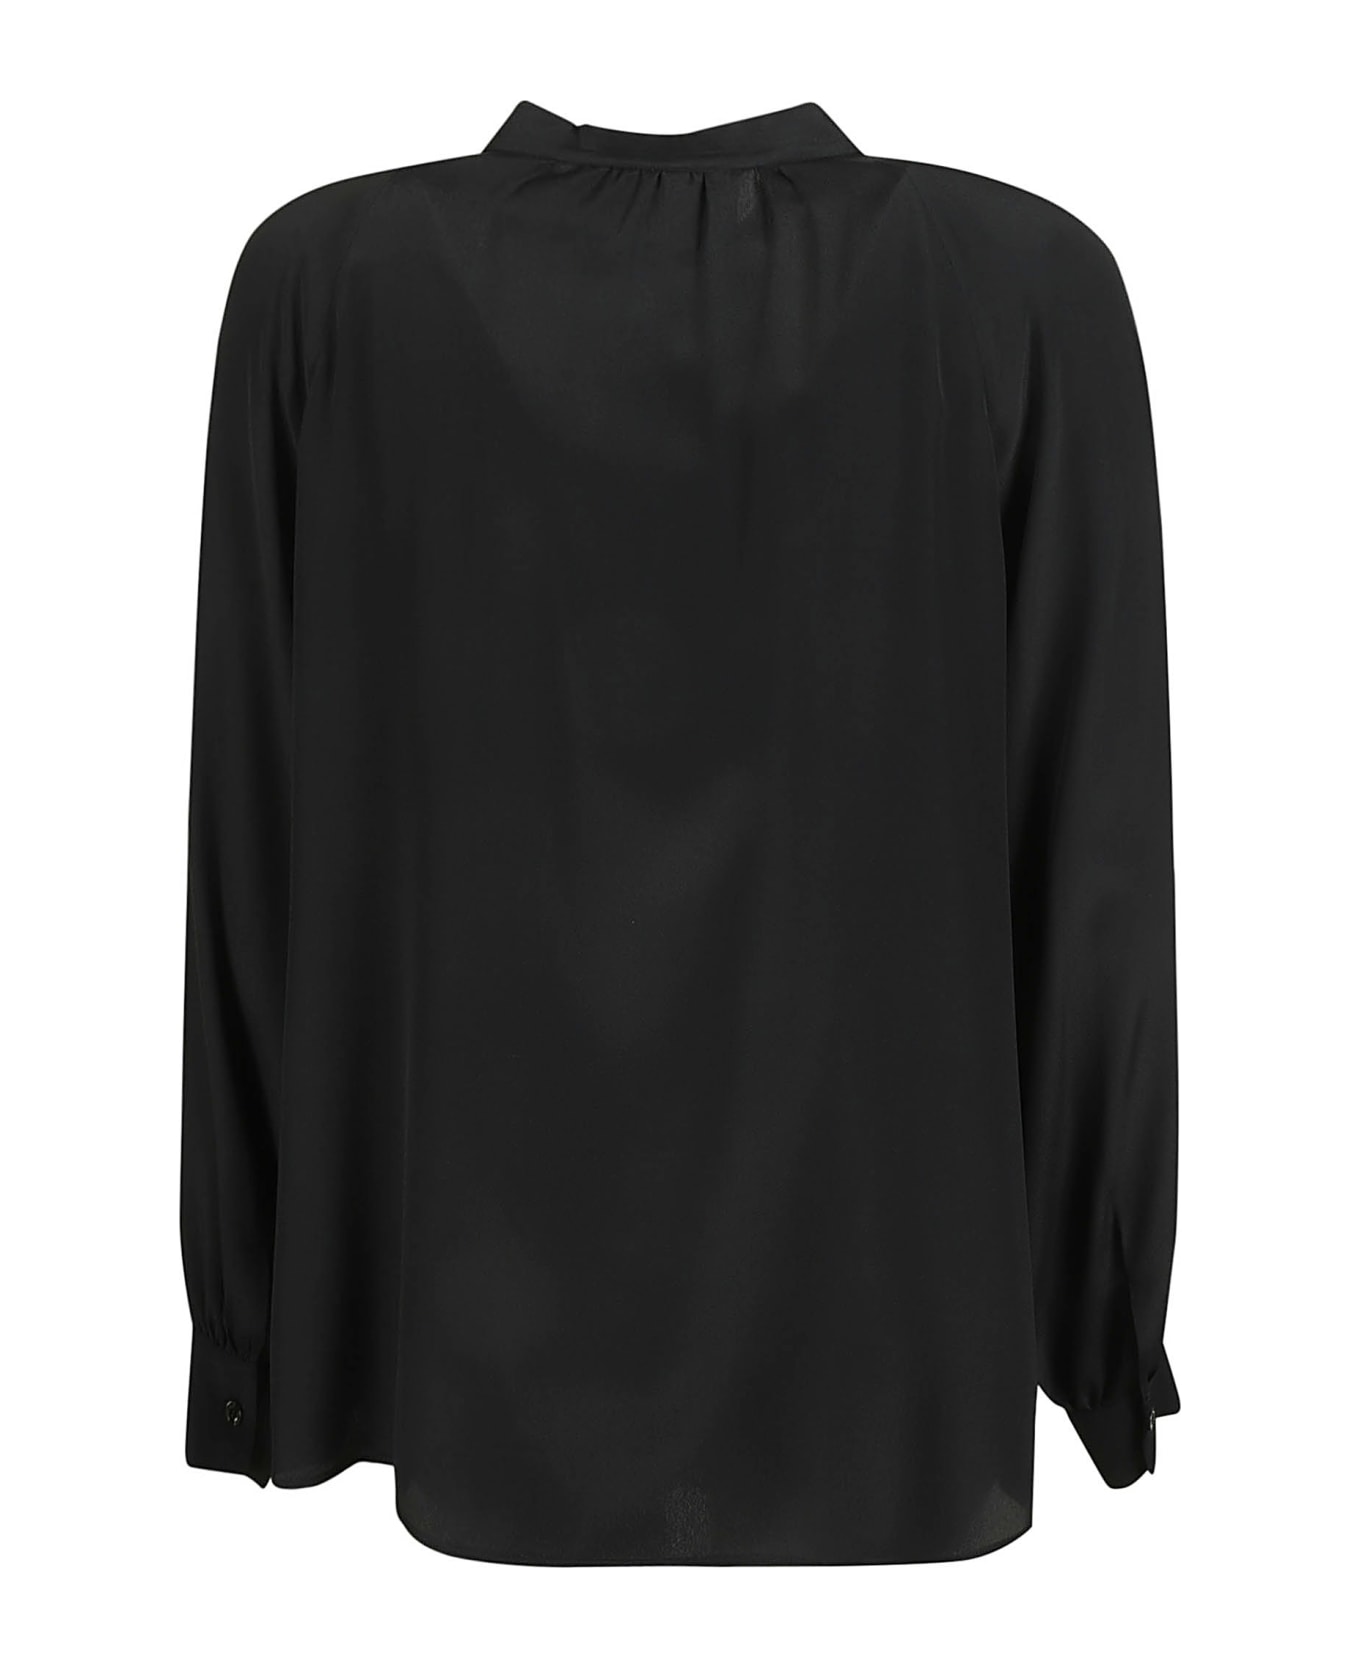 Boutique Moschino Buttoned Blouse - Black ブラウス